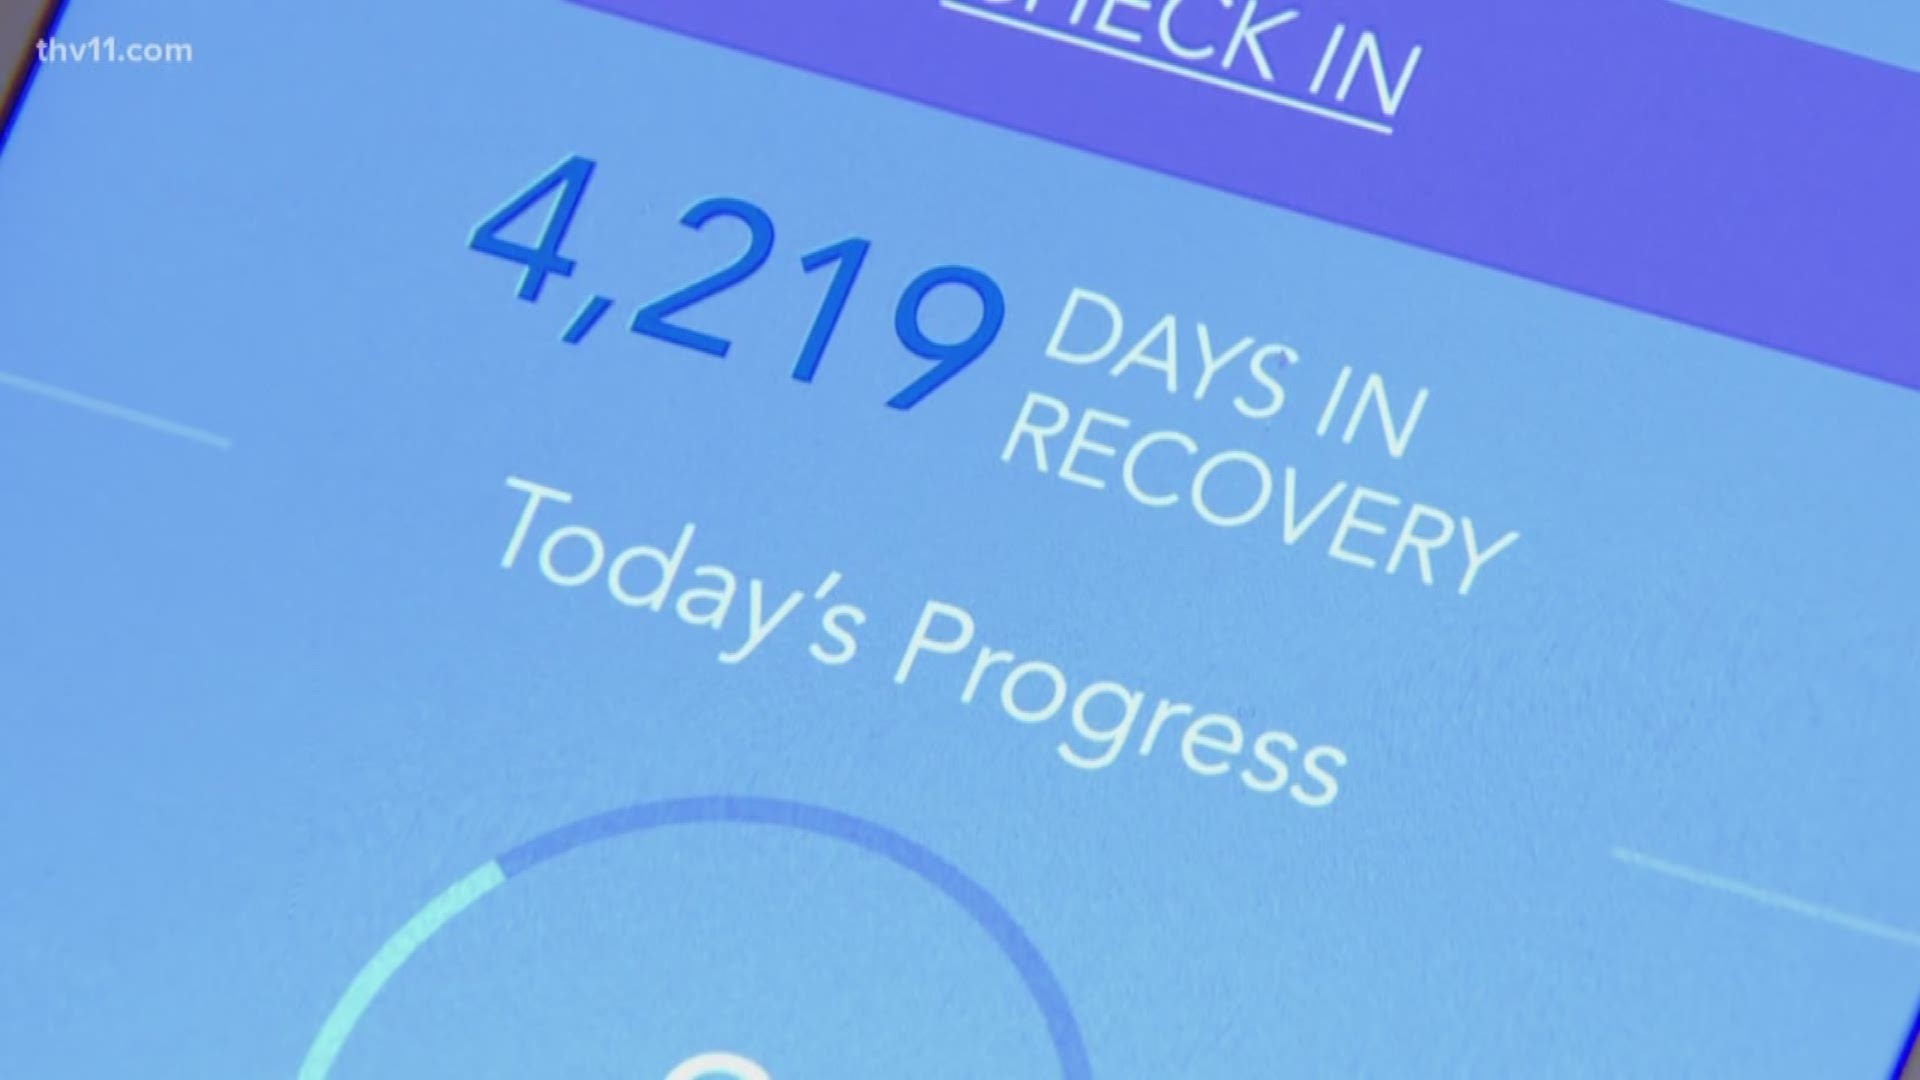 App helps people with drug recovery